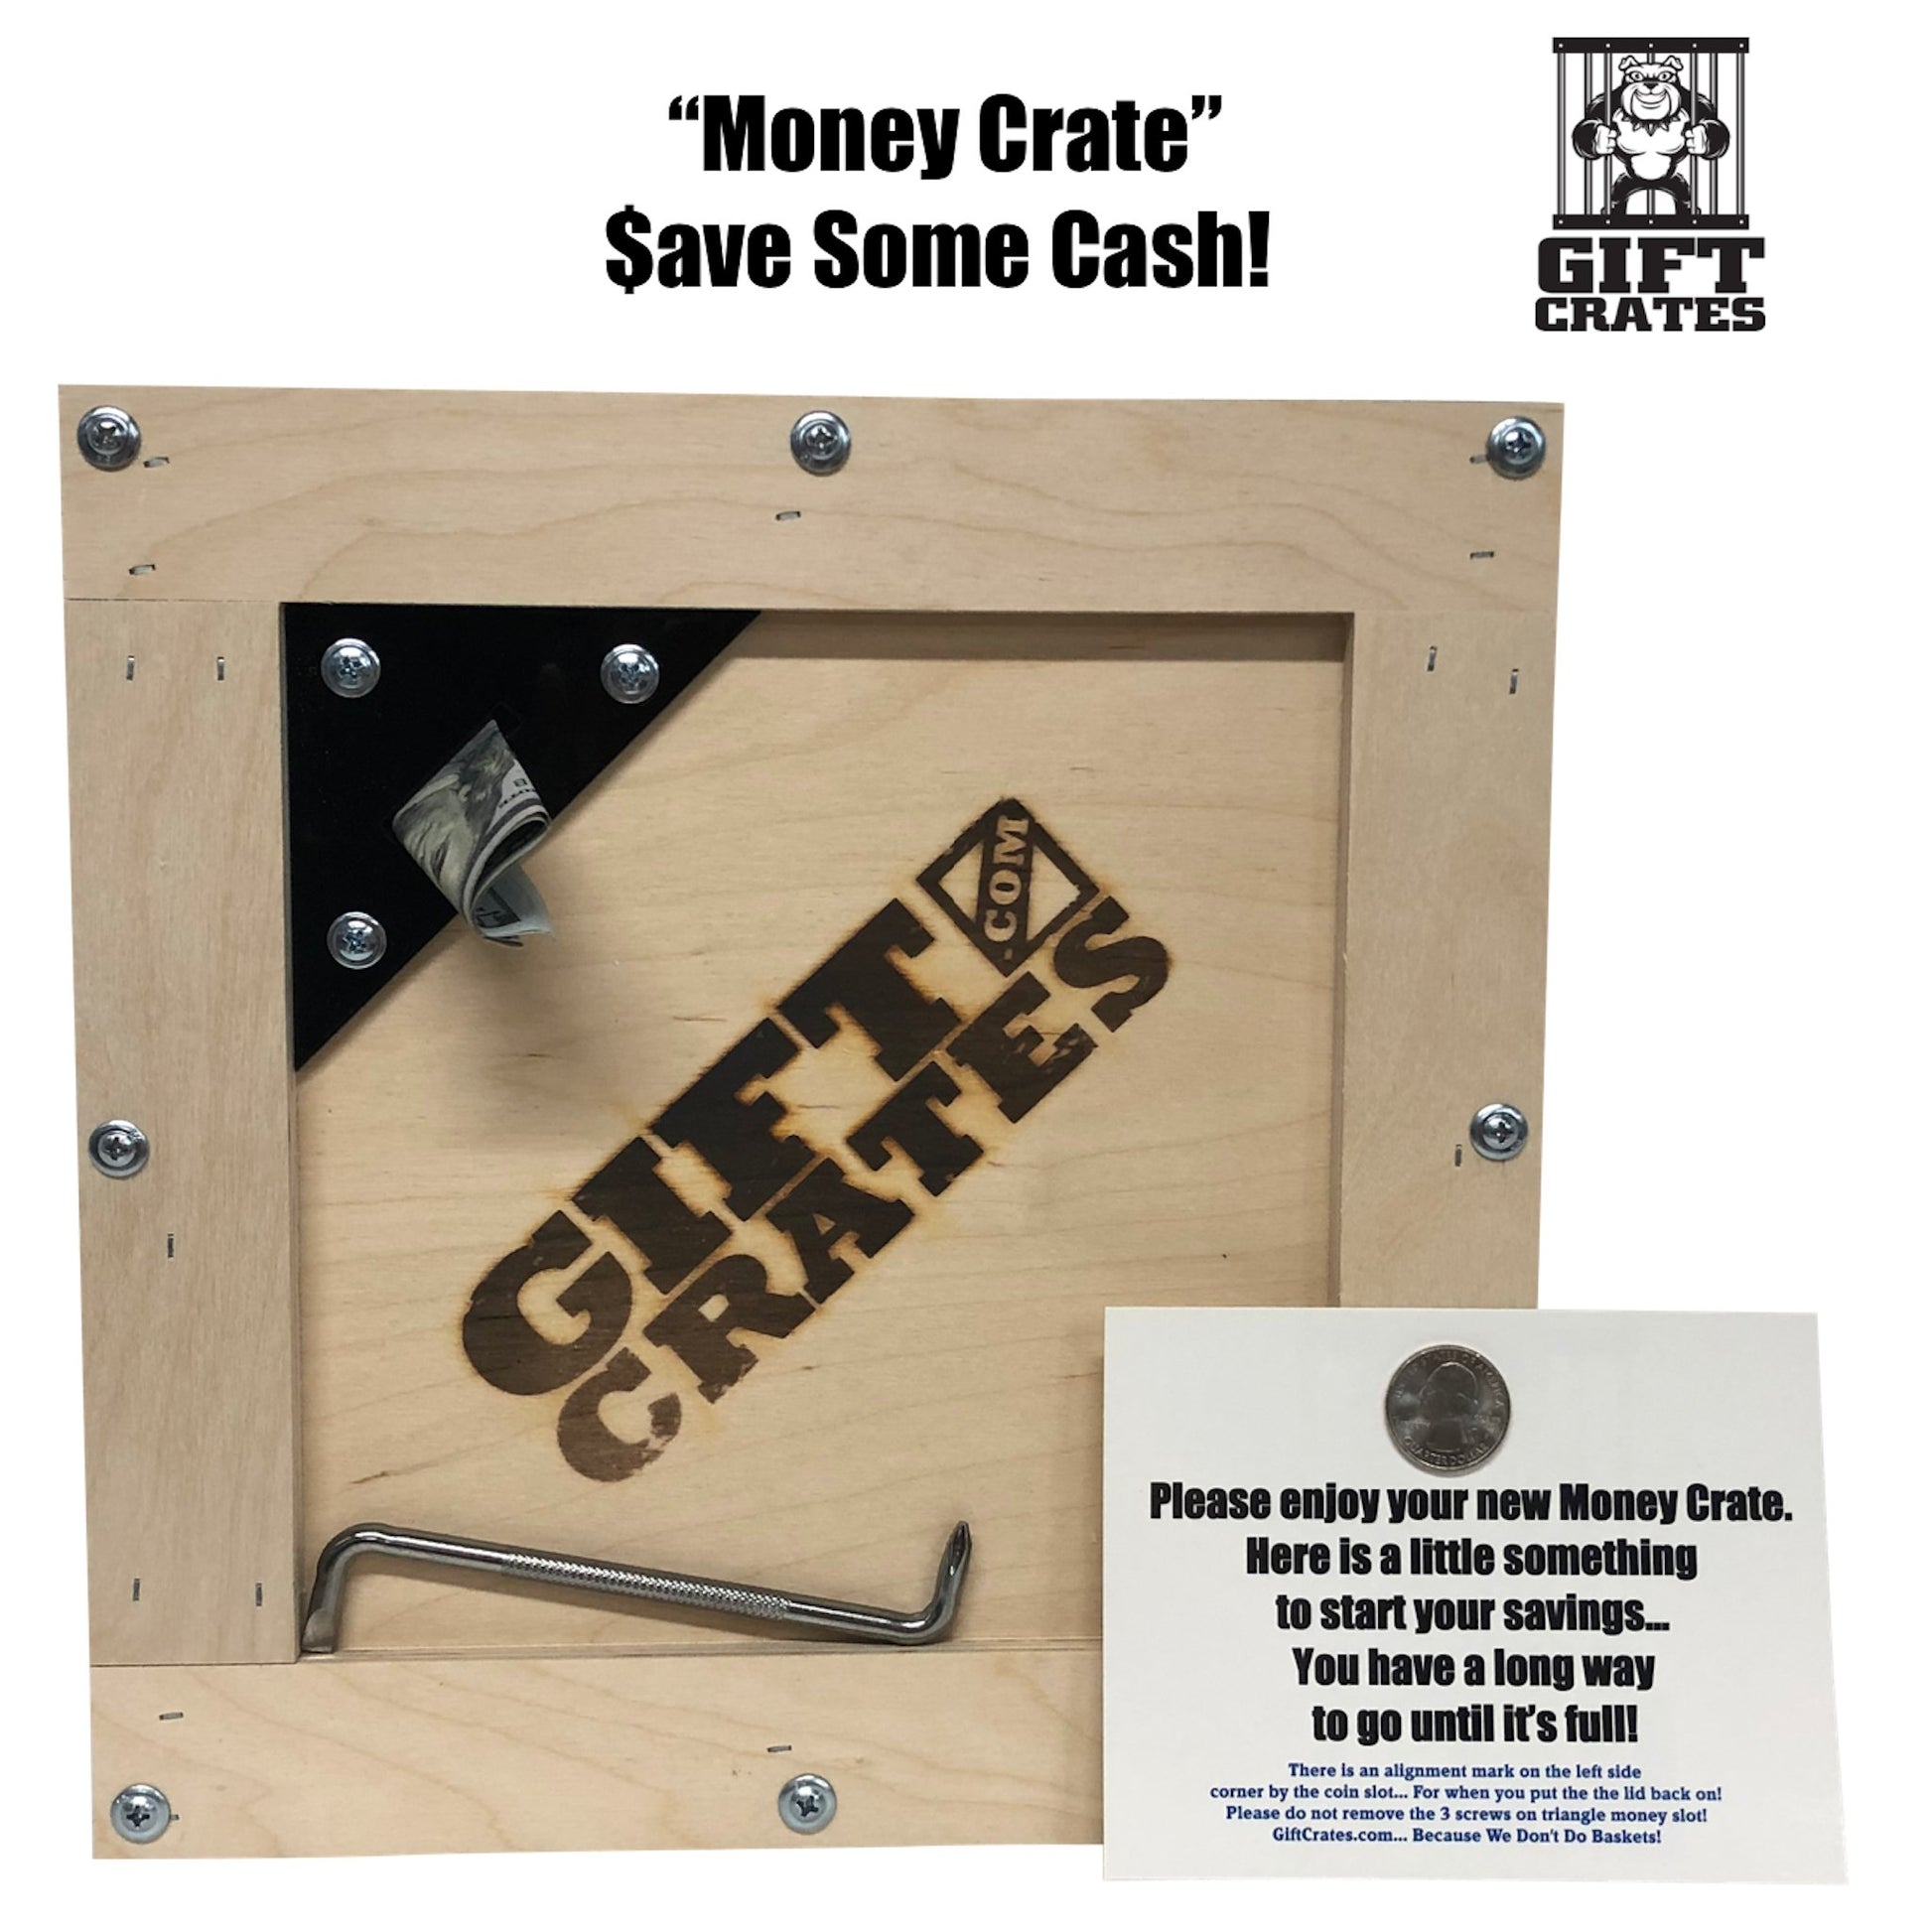 Dog Lovers Crate - Gift Crates